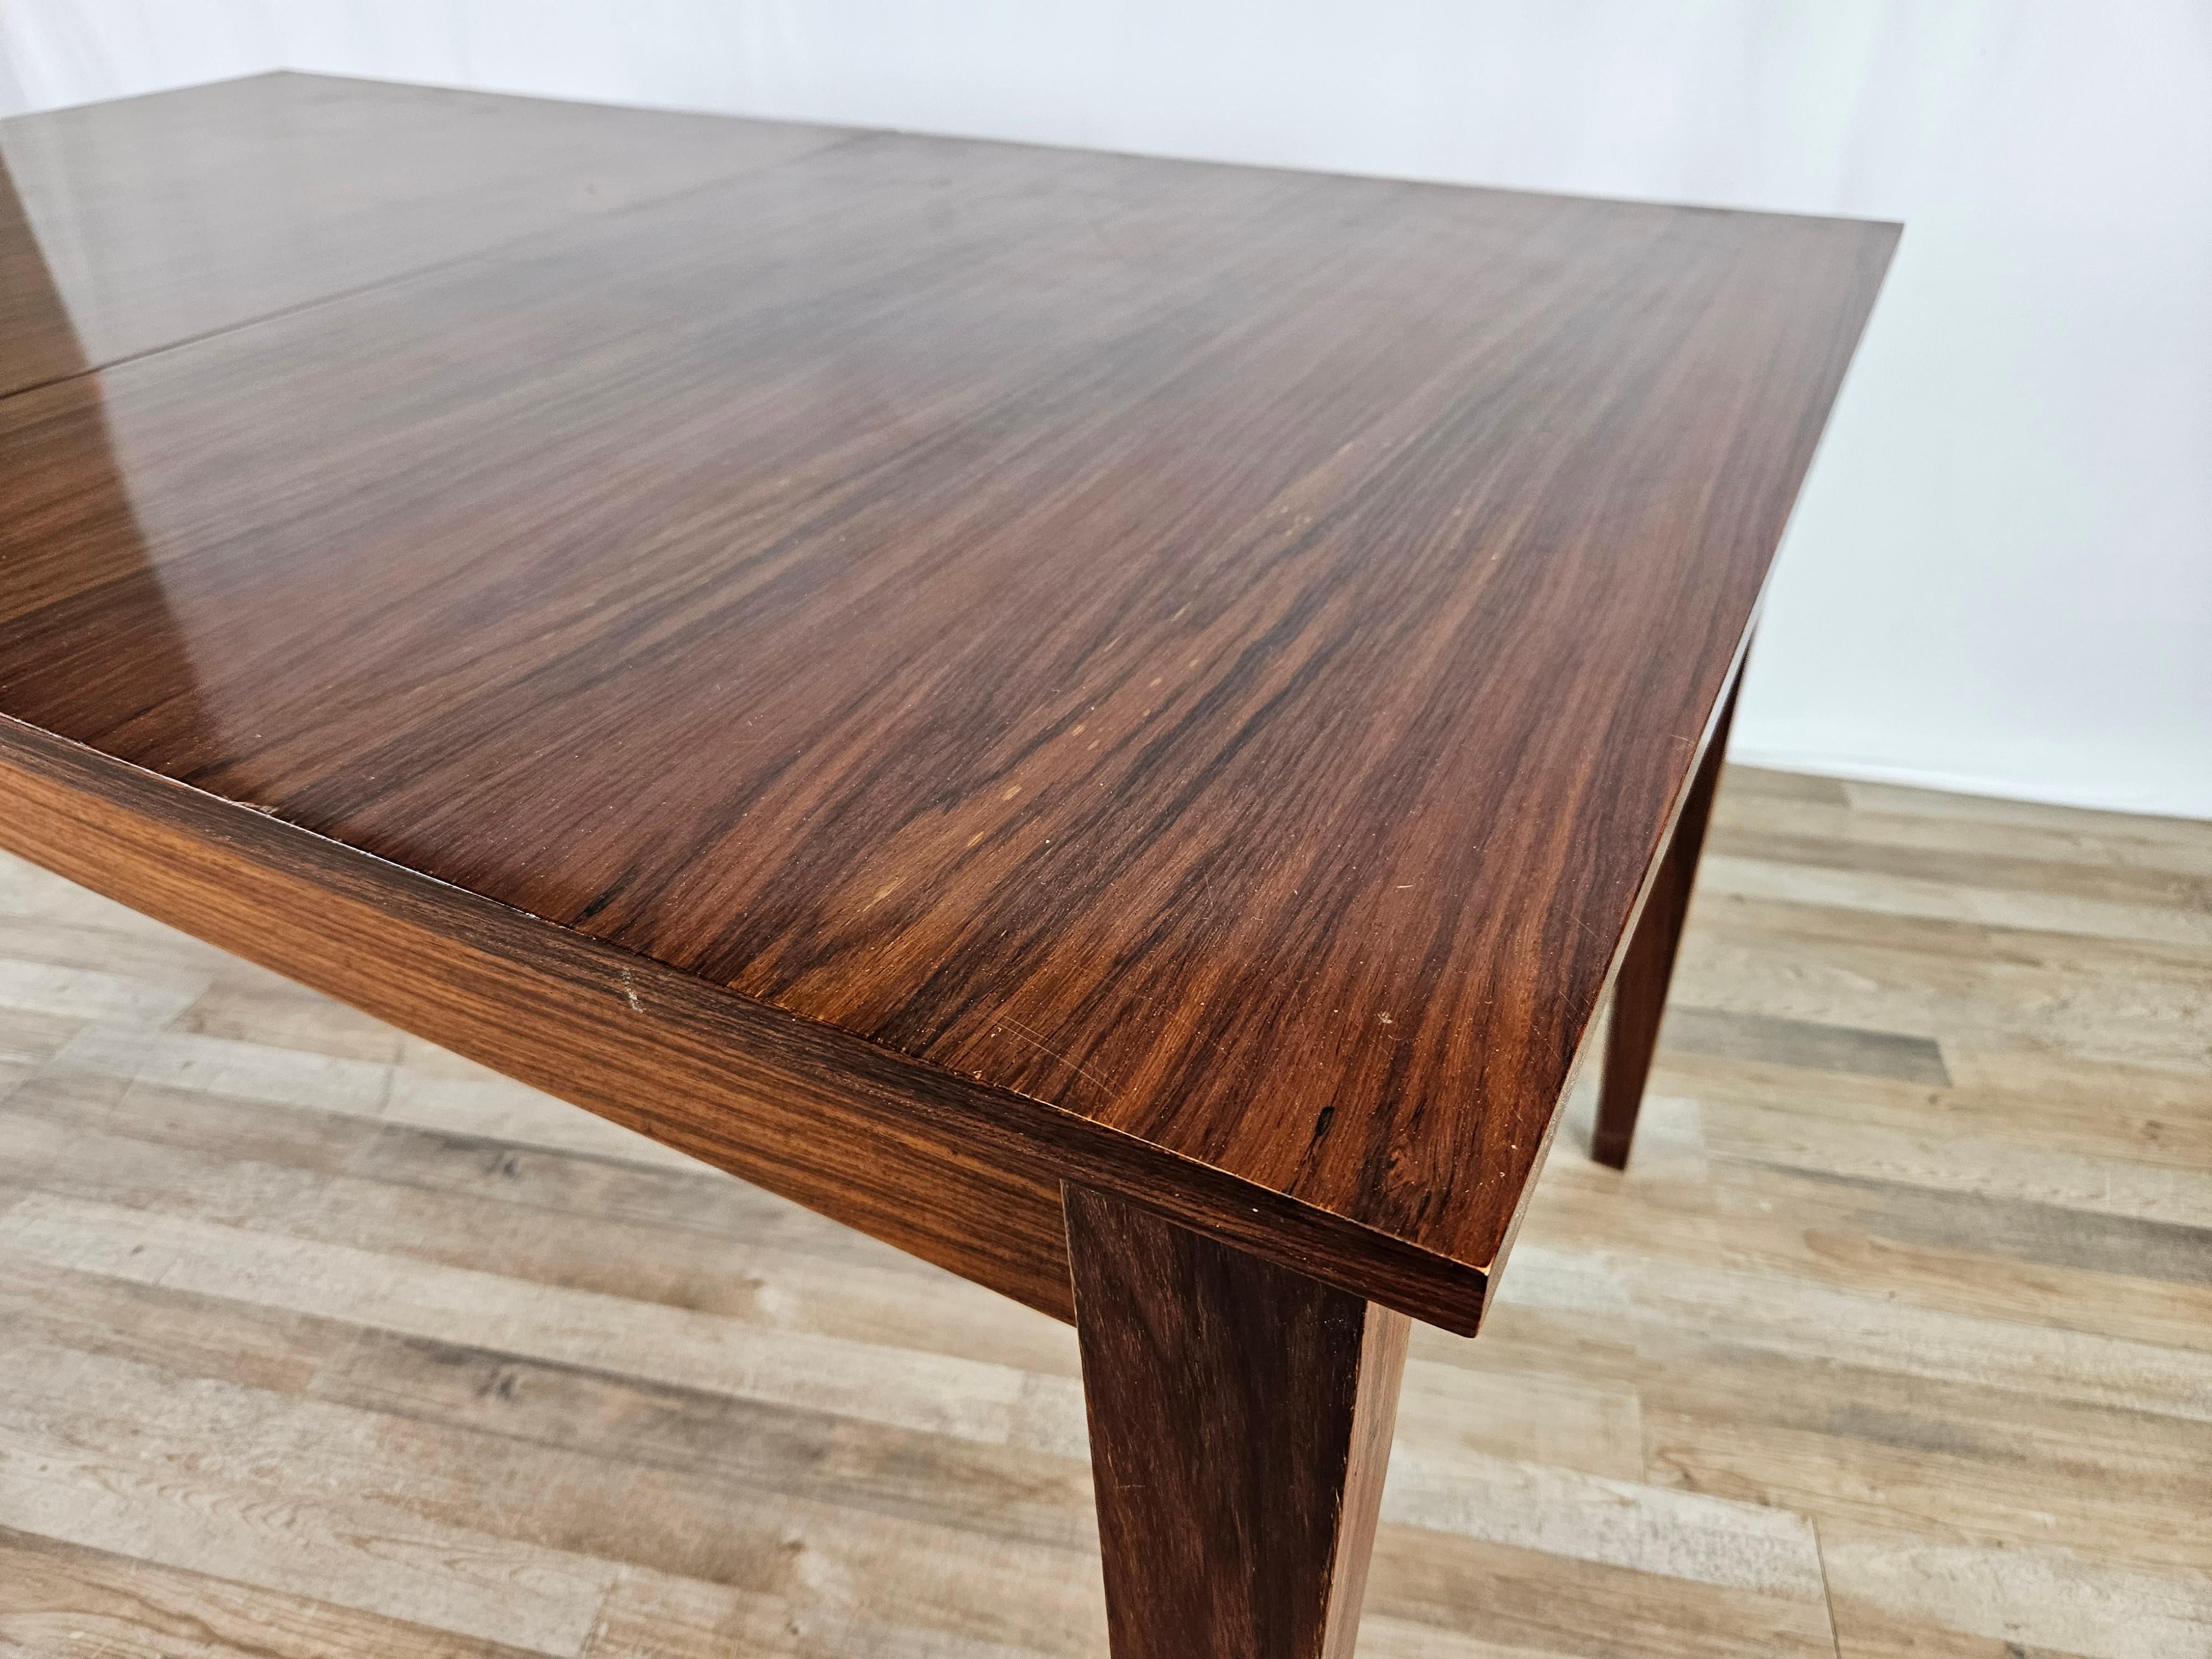 Scandinavian style extending laminate table In Good Condition For Sale In Premariacco, IT